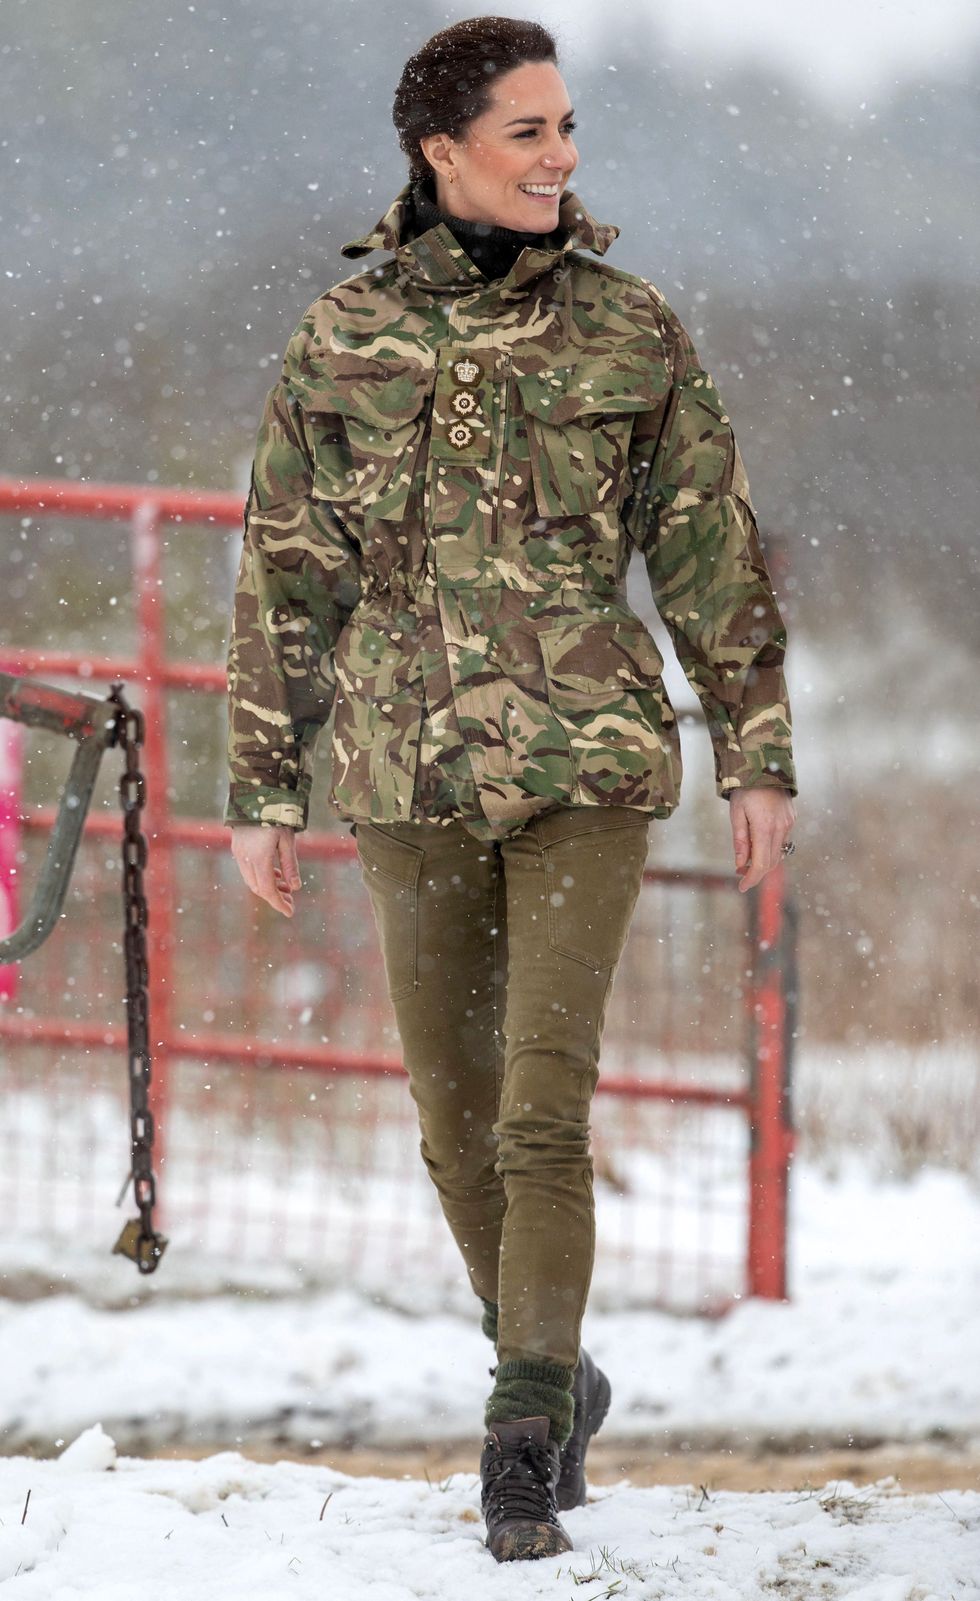 britains catherine, princess of wales reacts as she walks in the snow while meeting members of the 1st battalion irish guards during her visit to the salisbury plain training area, near salisbury, southern england, on march 8, 2023 photo by steve reigate pool afp photo by steve reigatepoolafp via getty images